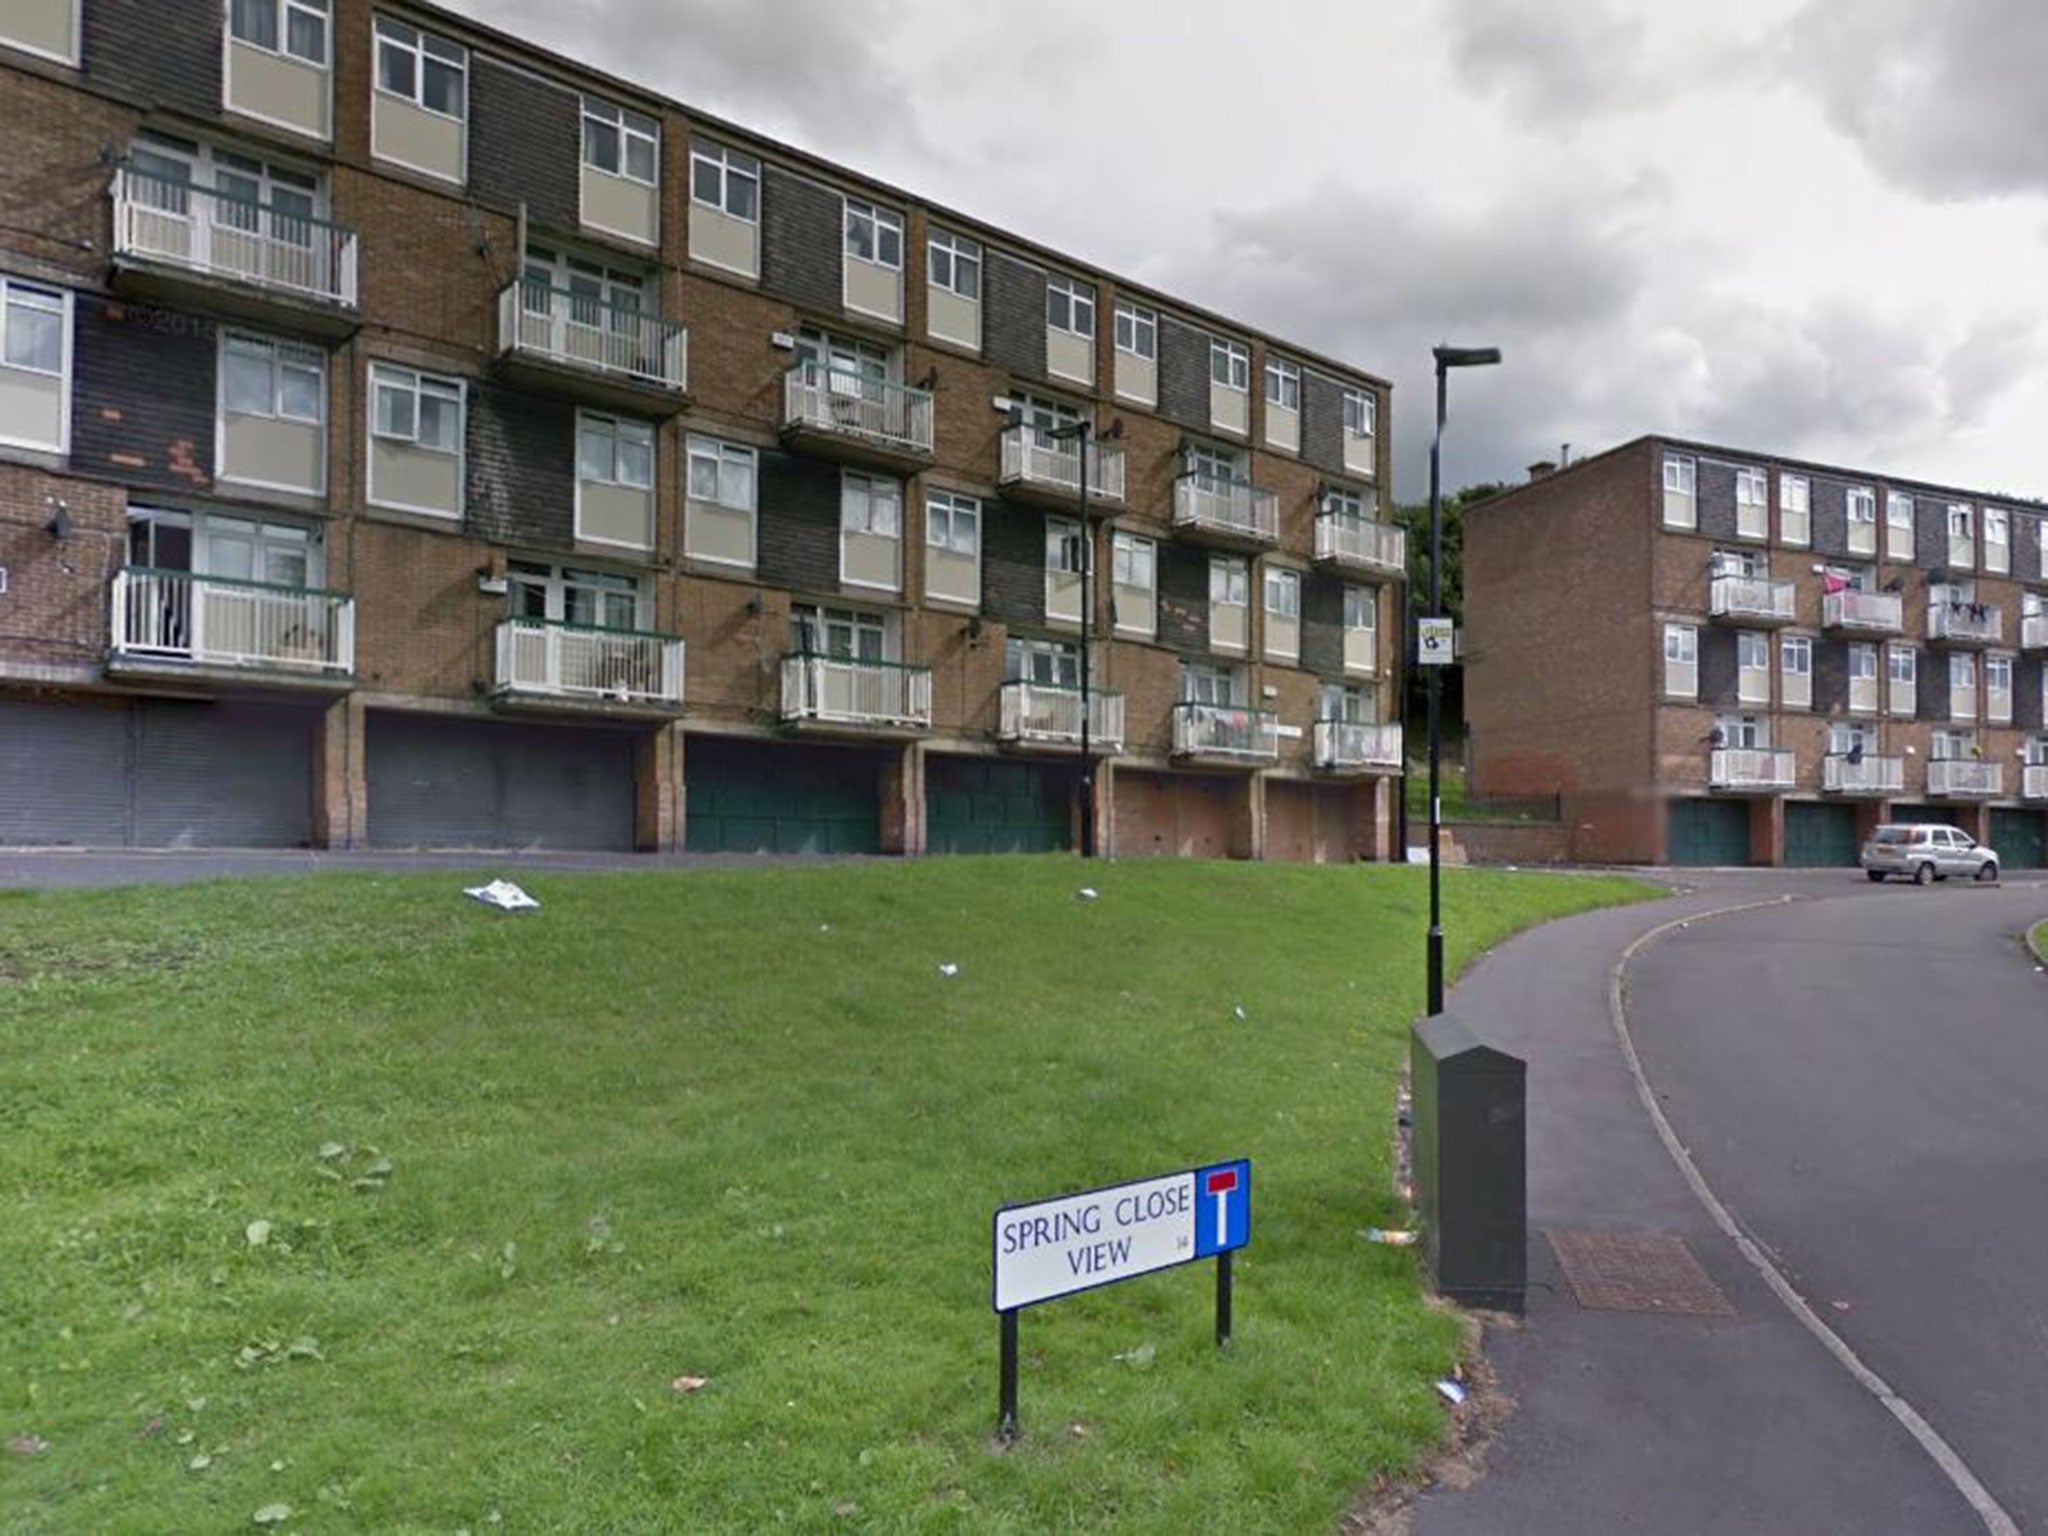 Police were called to Spring Close View, in Gleadless Valley, around 4.20pm on Monday